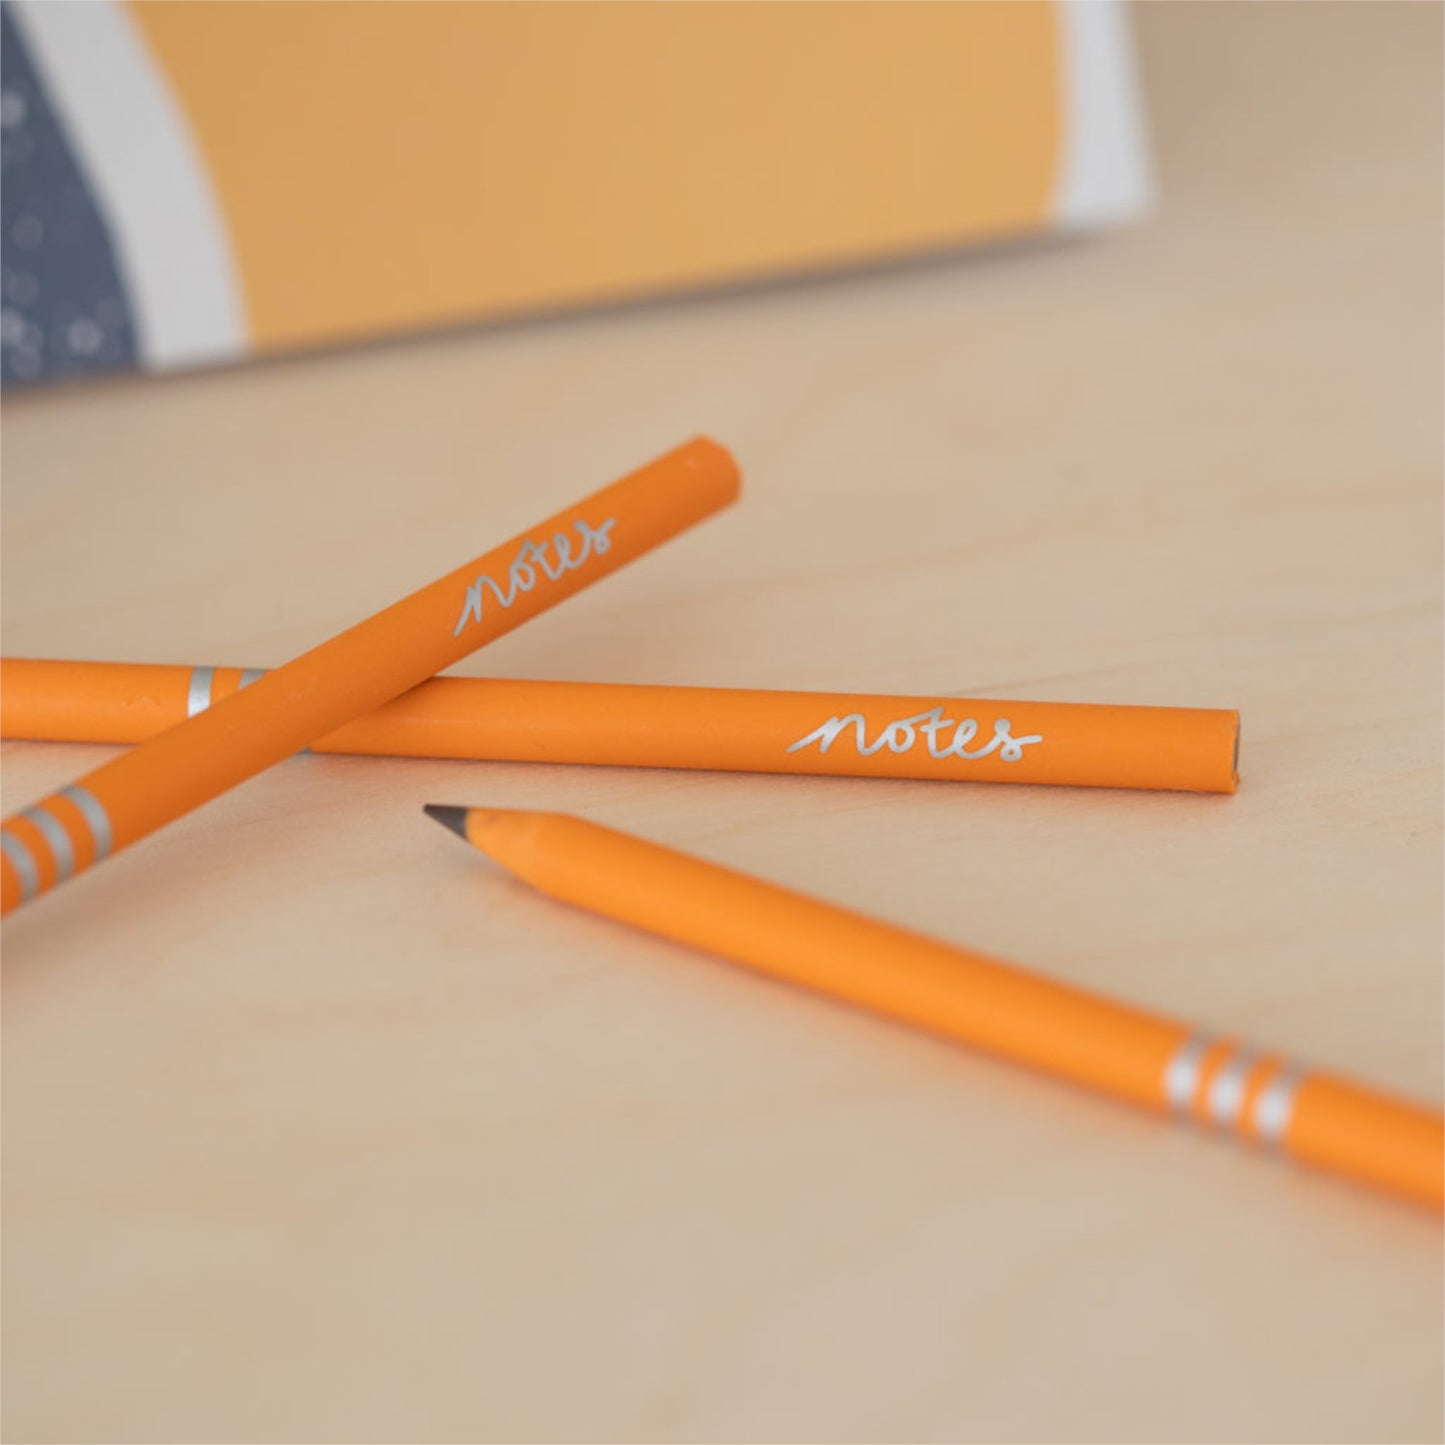 Recycled charity pencils - 3 pack - Orange